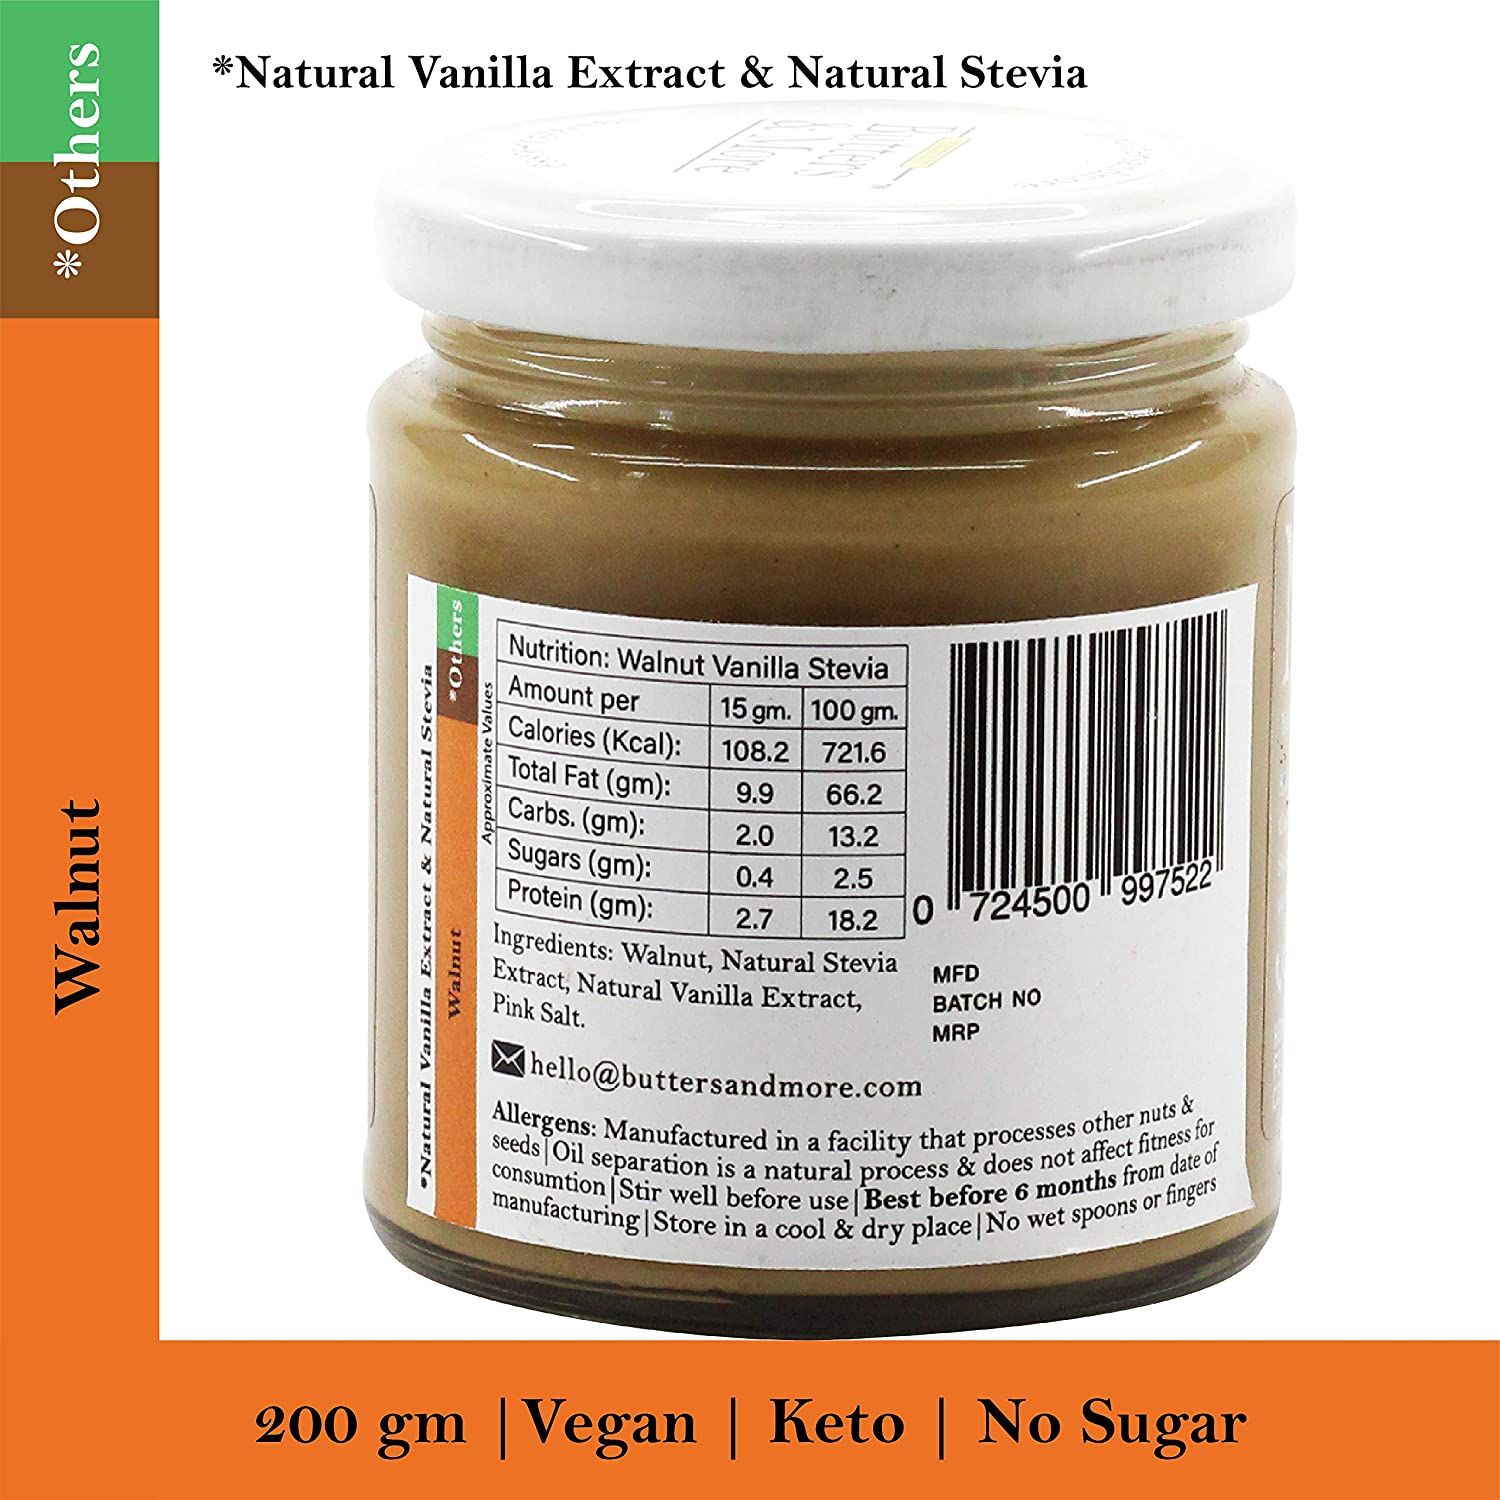 Butters & More Vegan Walnut Butter With Natural Vanilla Extract & Natural Stevia Extract Image